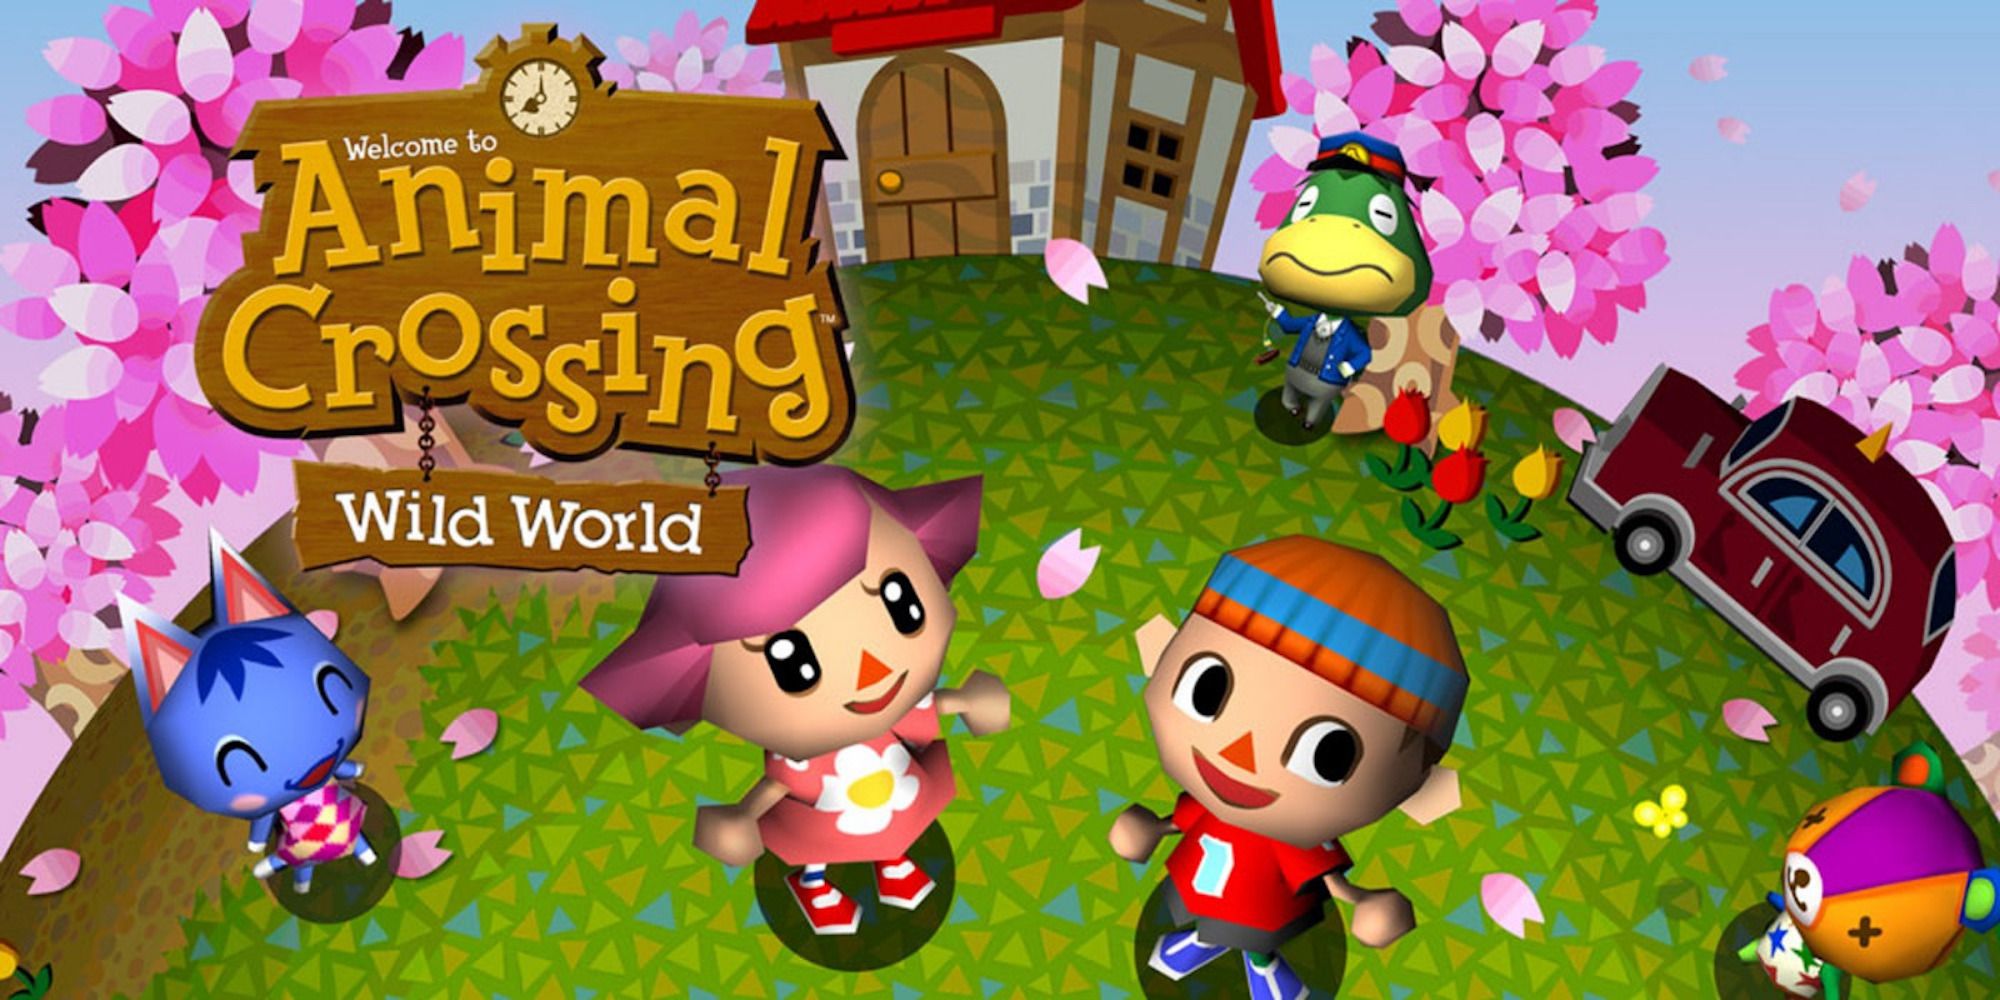 Promo art featuring characters from Animal Crossing: Wild World